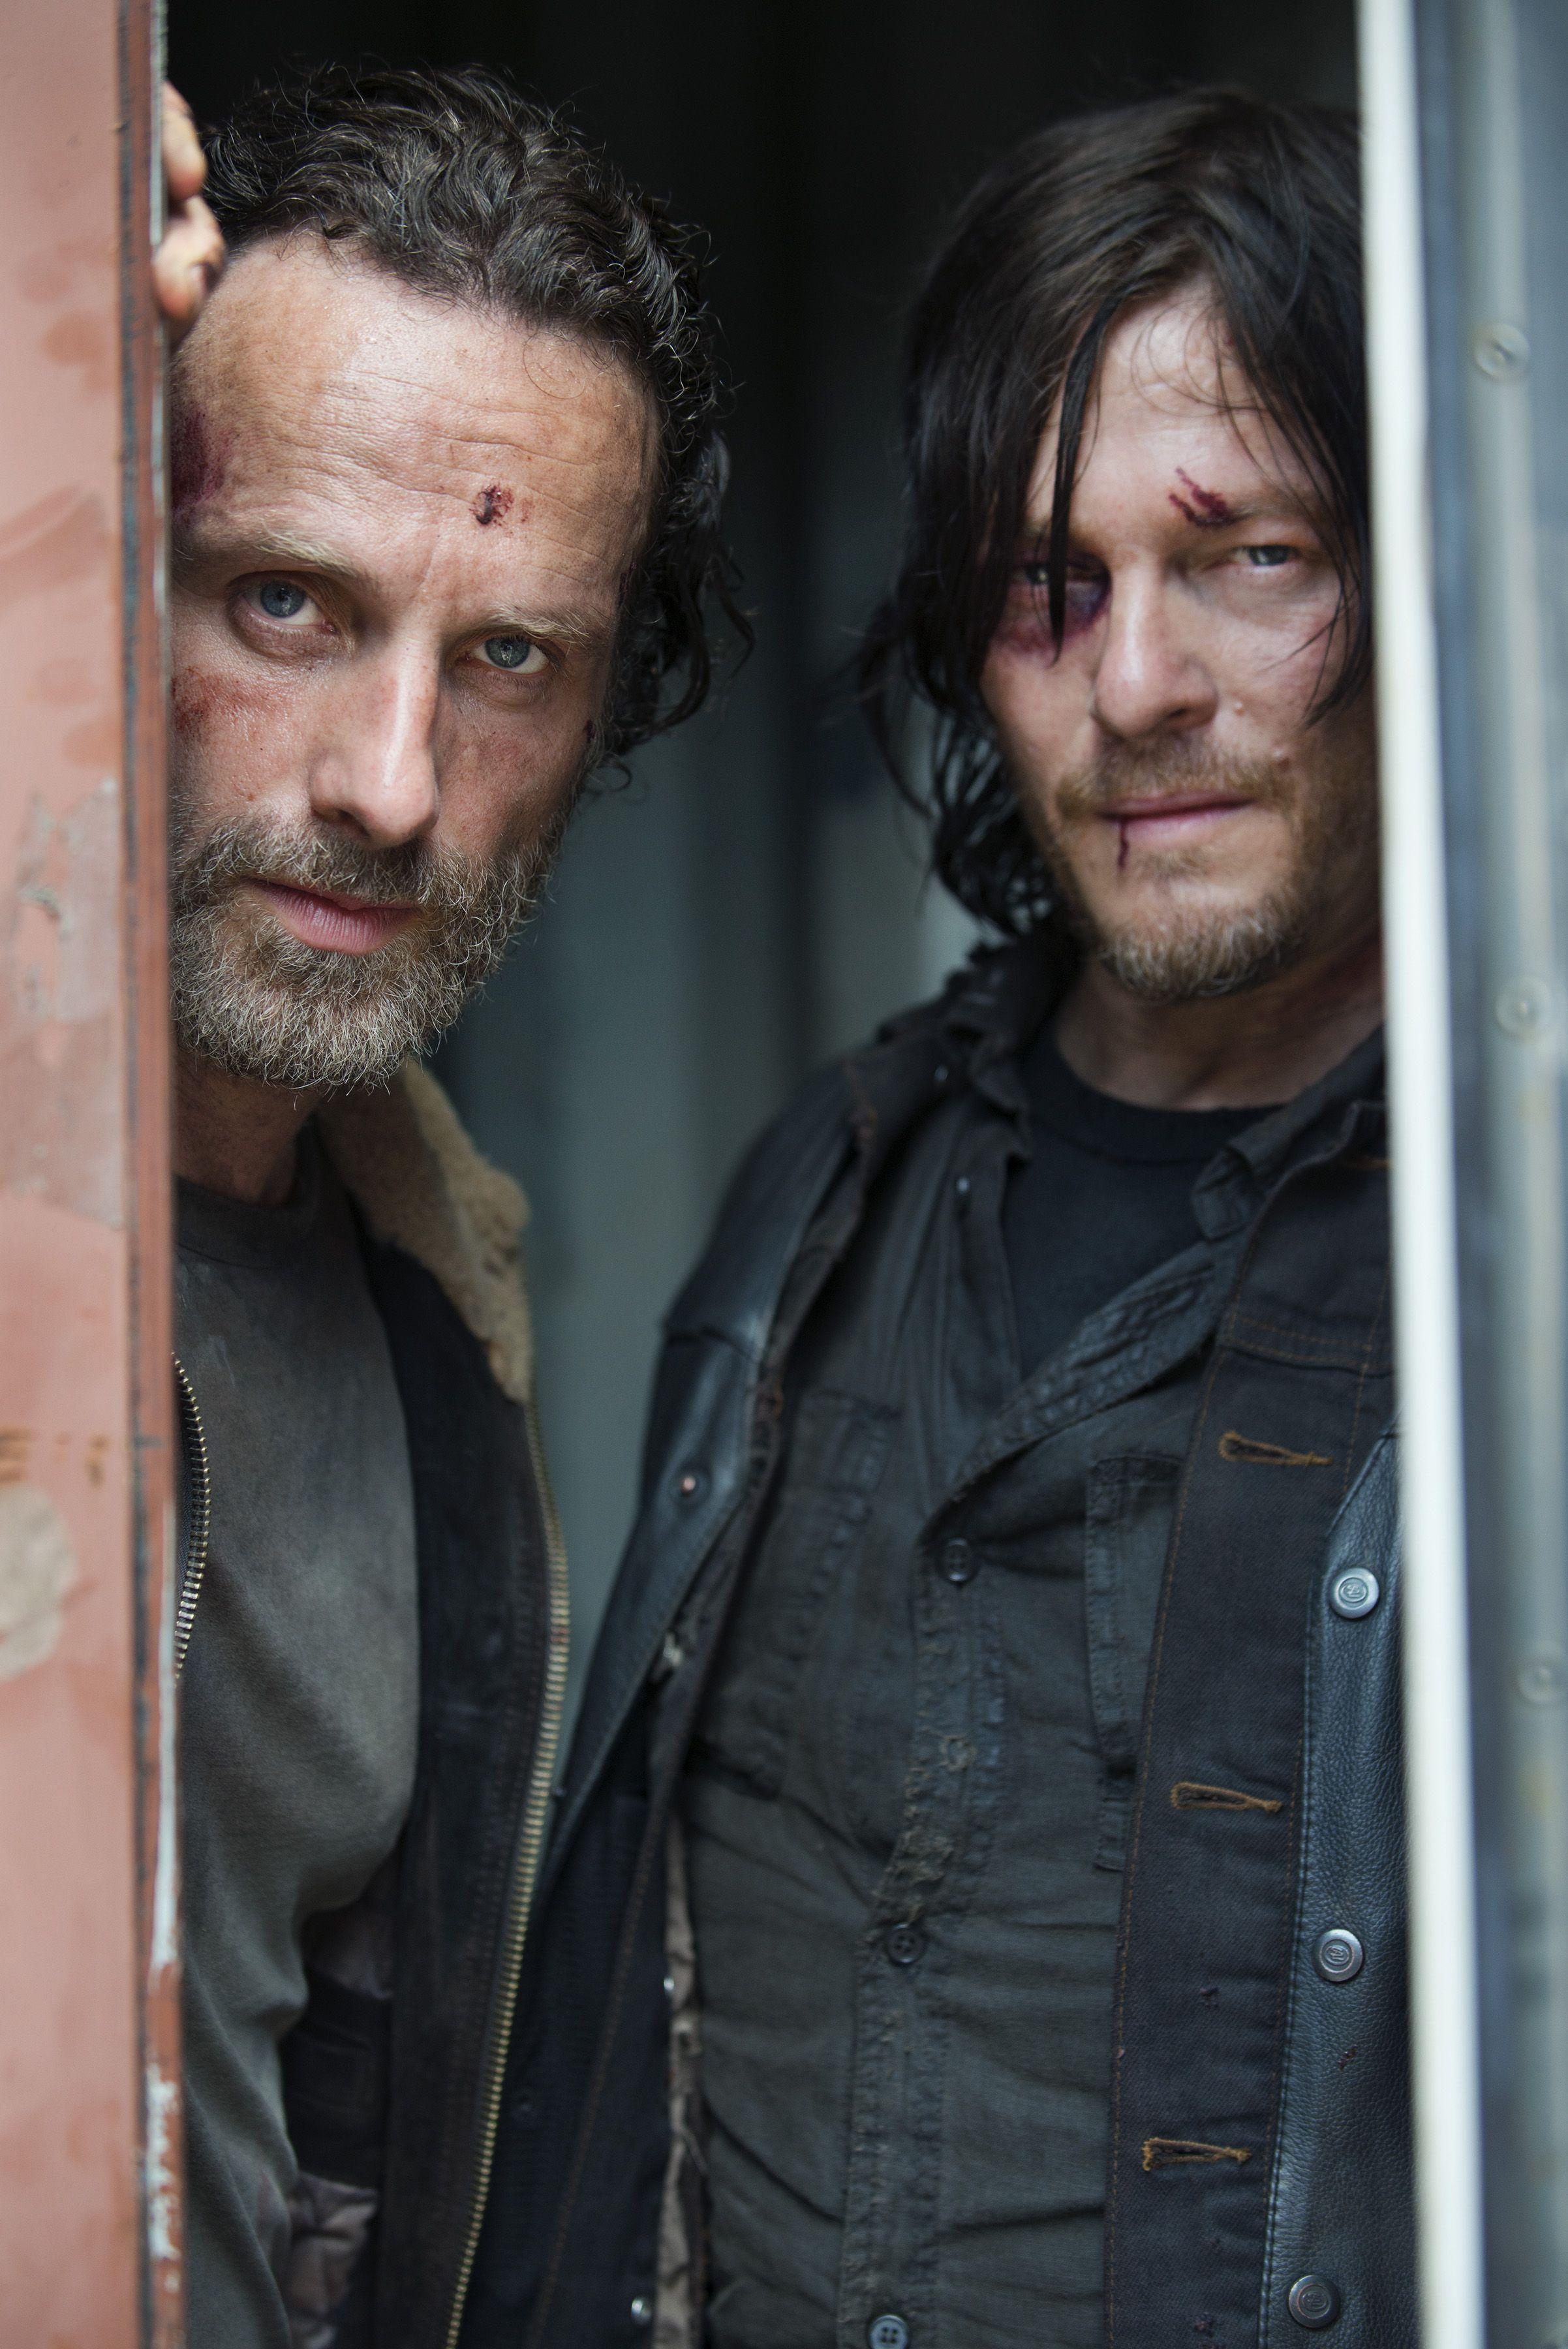 Andrew Lincoln as Rick Grimes and Norman Reedus as Daryl Dixon